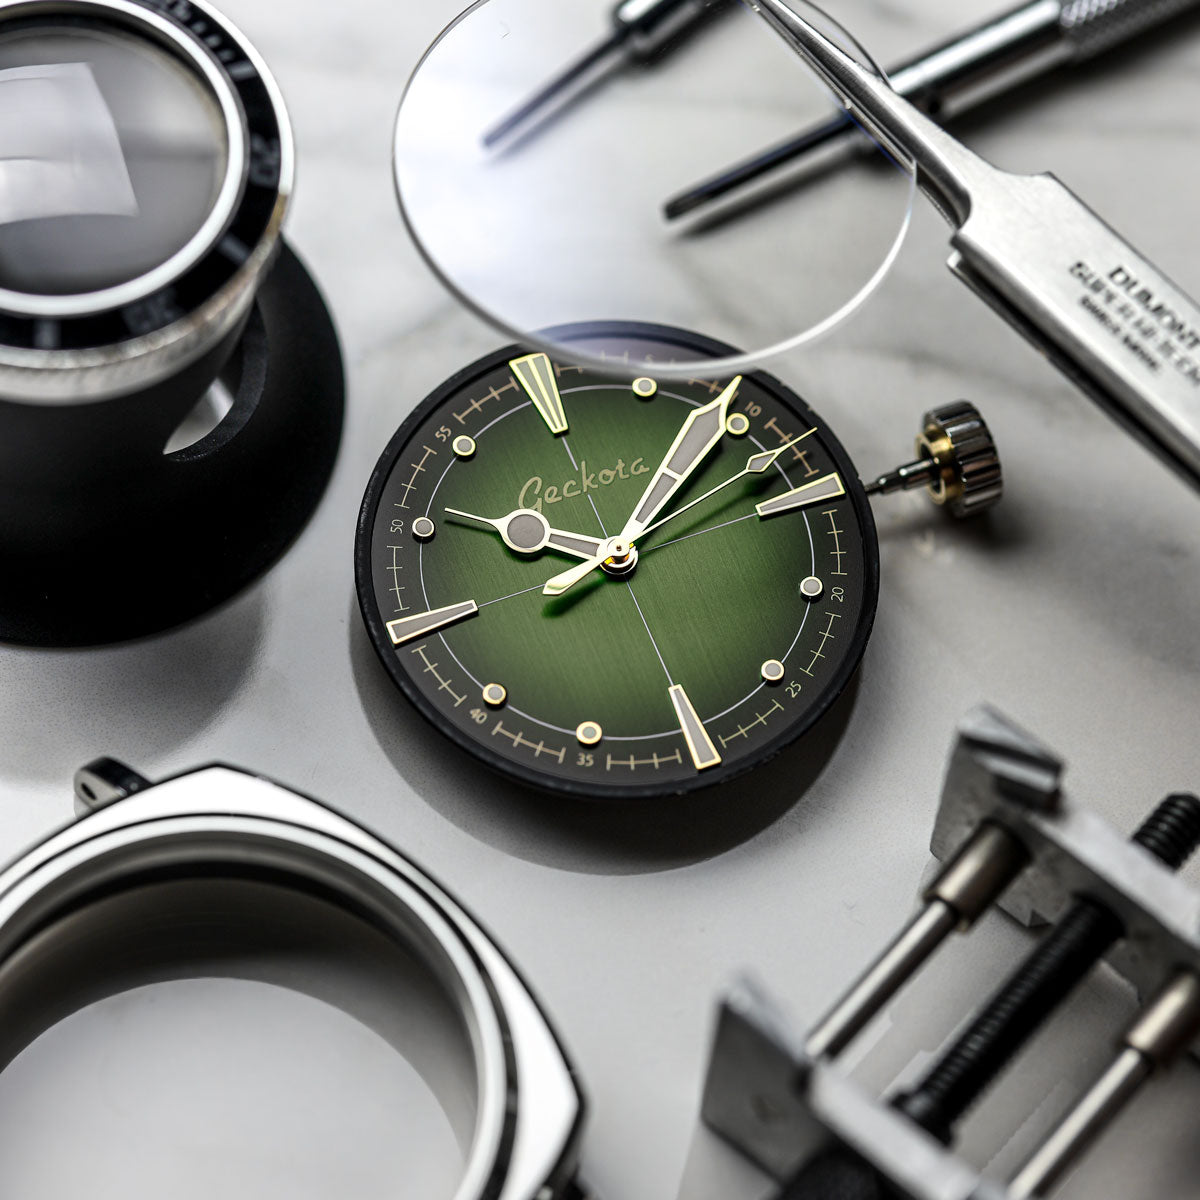 Geckota Pioneer Automatic Watch Brushed Green Dial